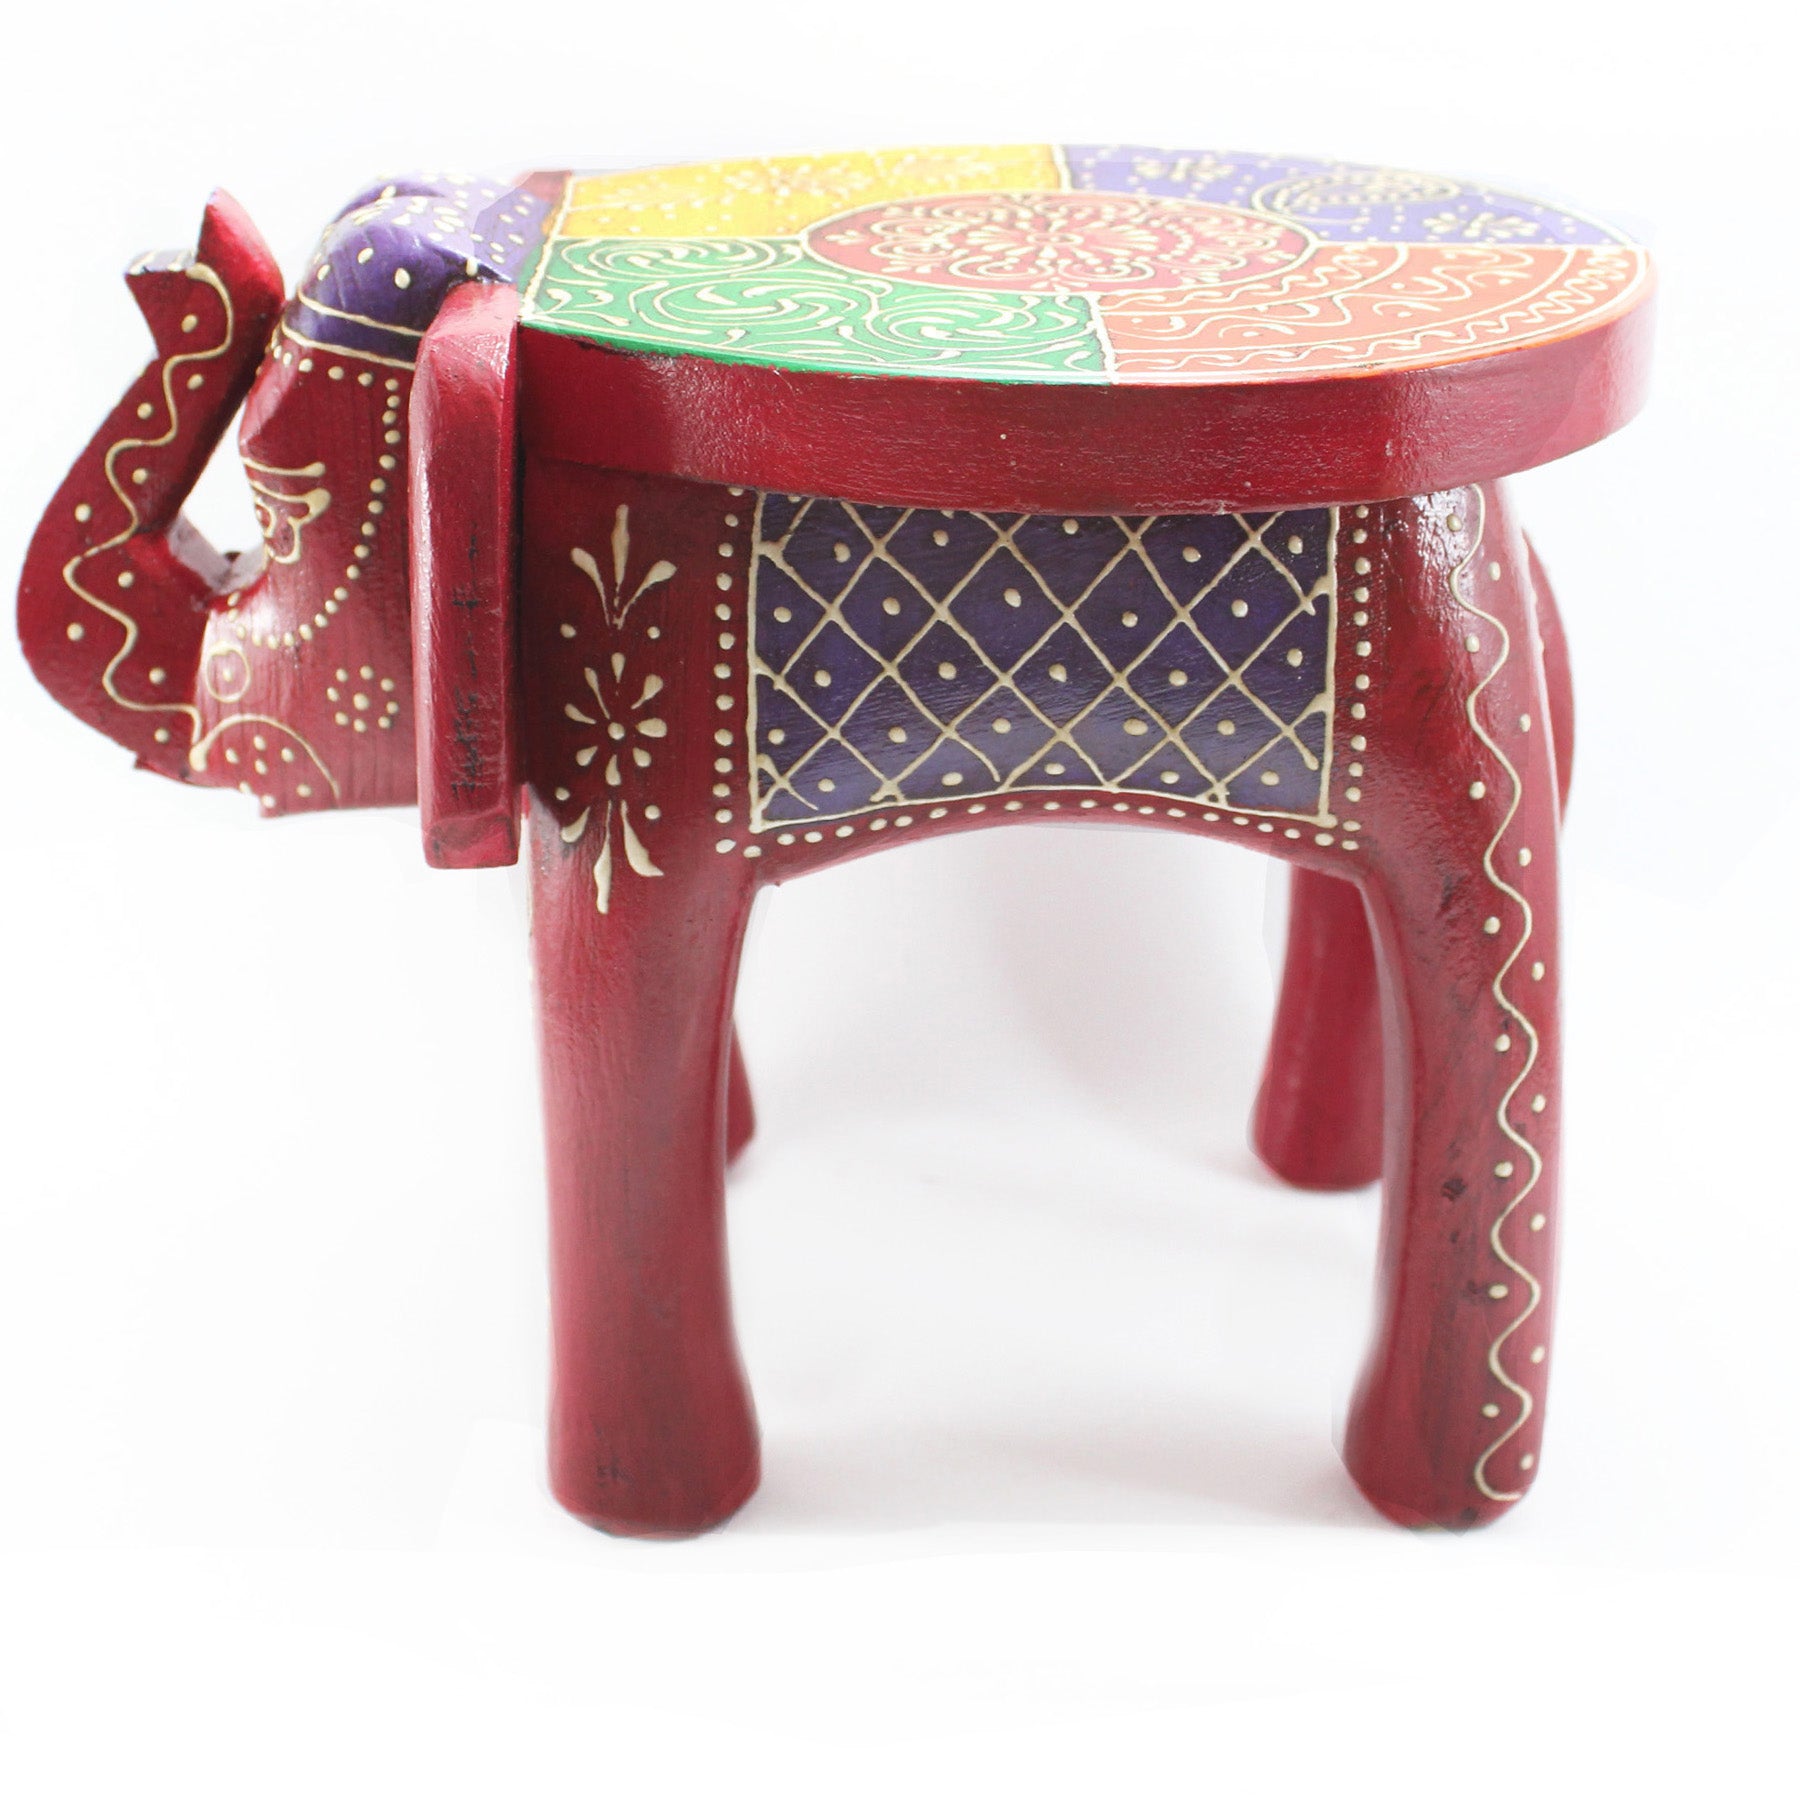 Red Hand Painted Wooden Elephant Stool